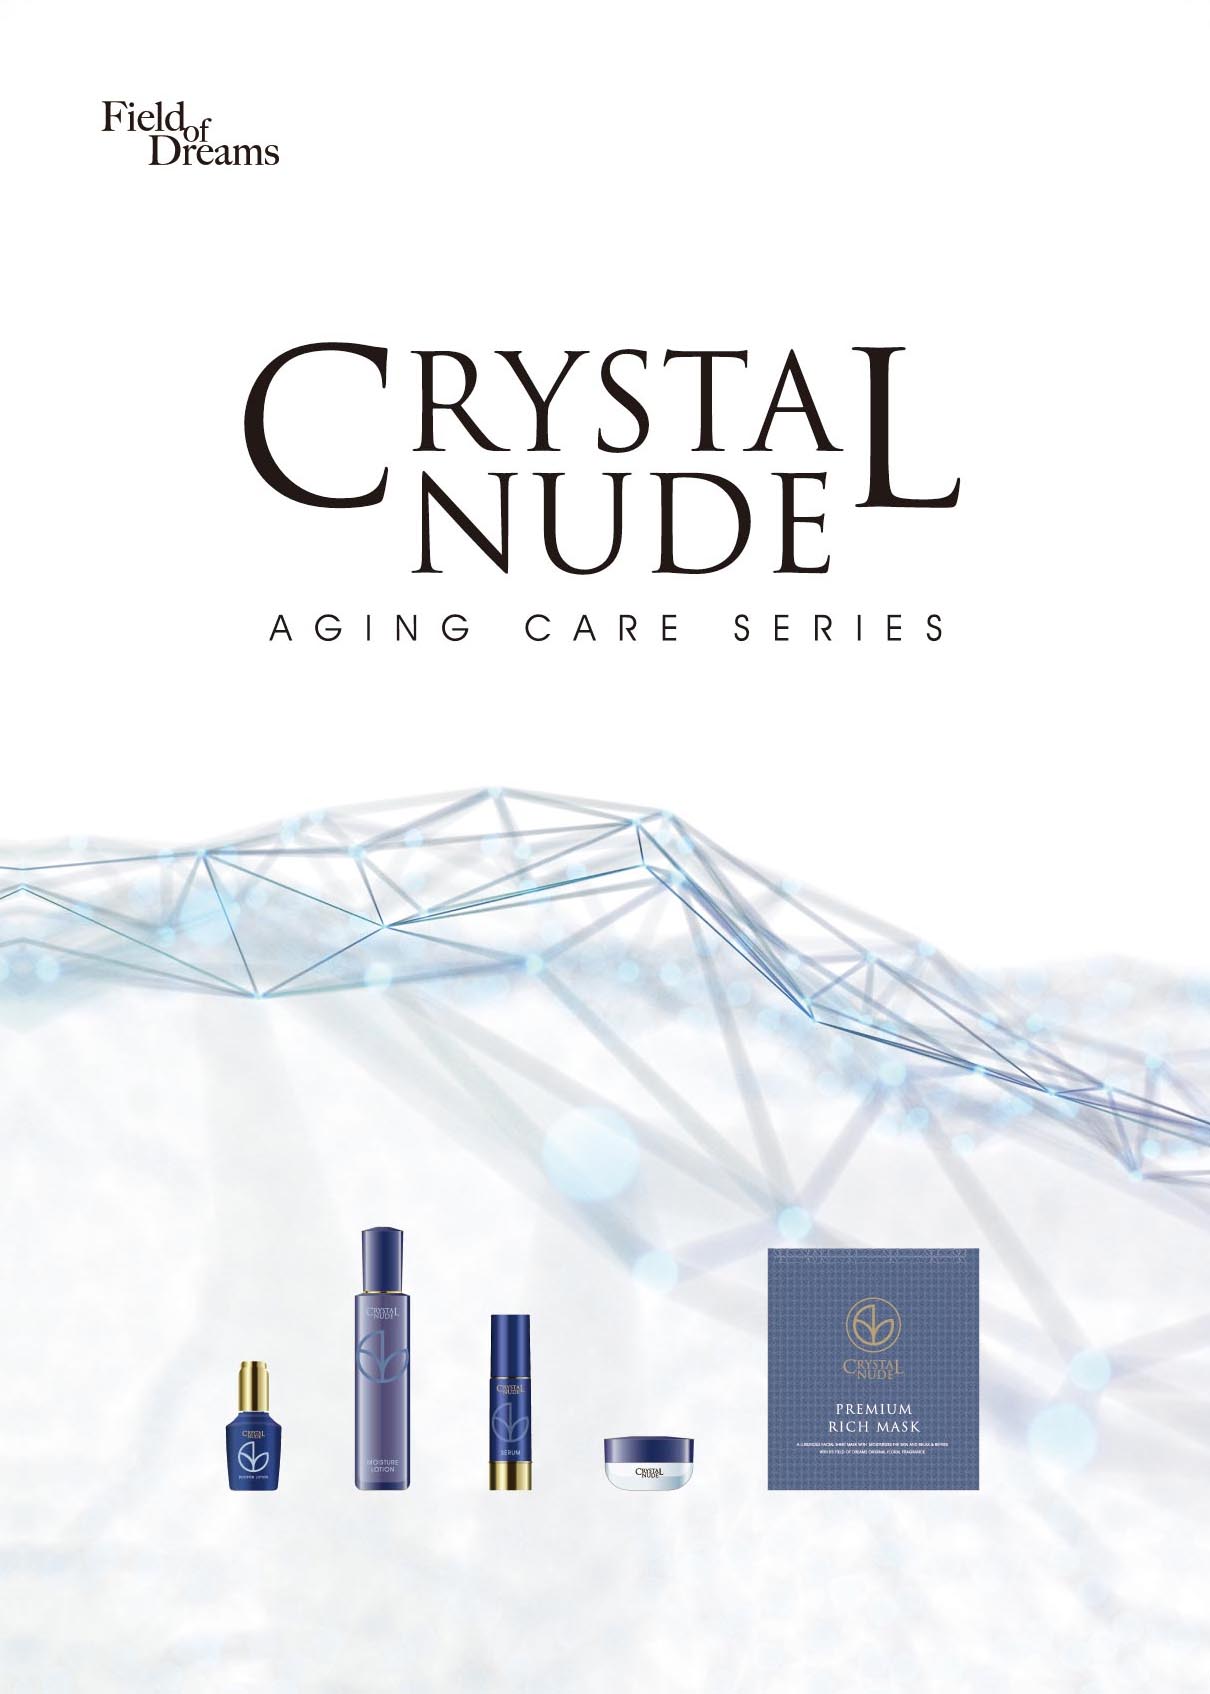 CRYSTALNUDE AGING CARE SERIES